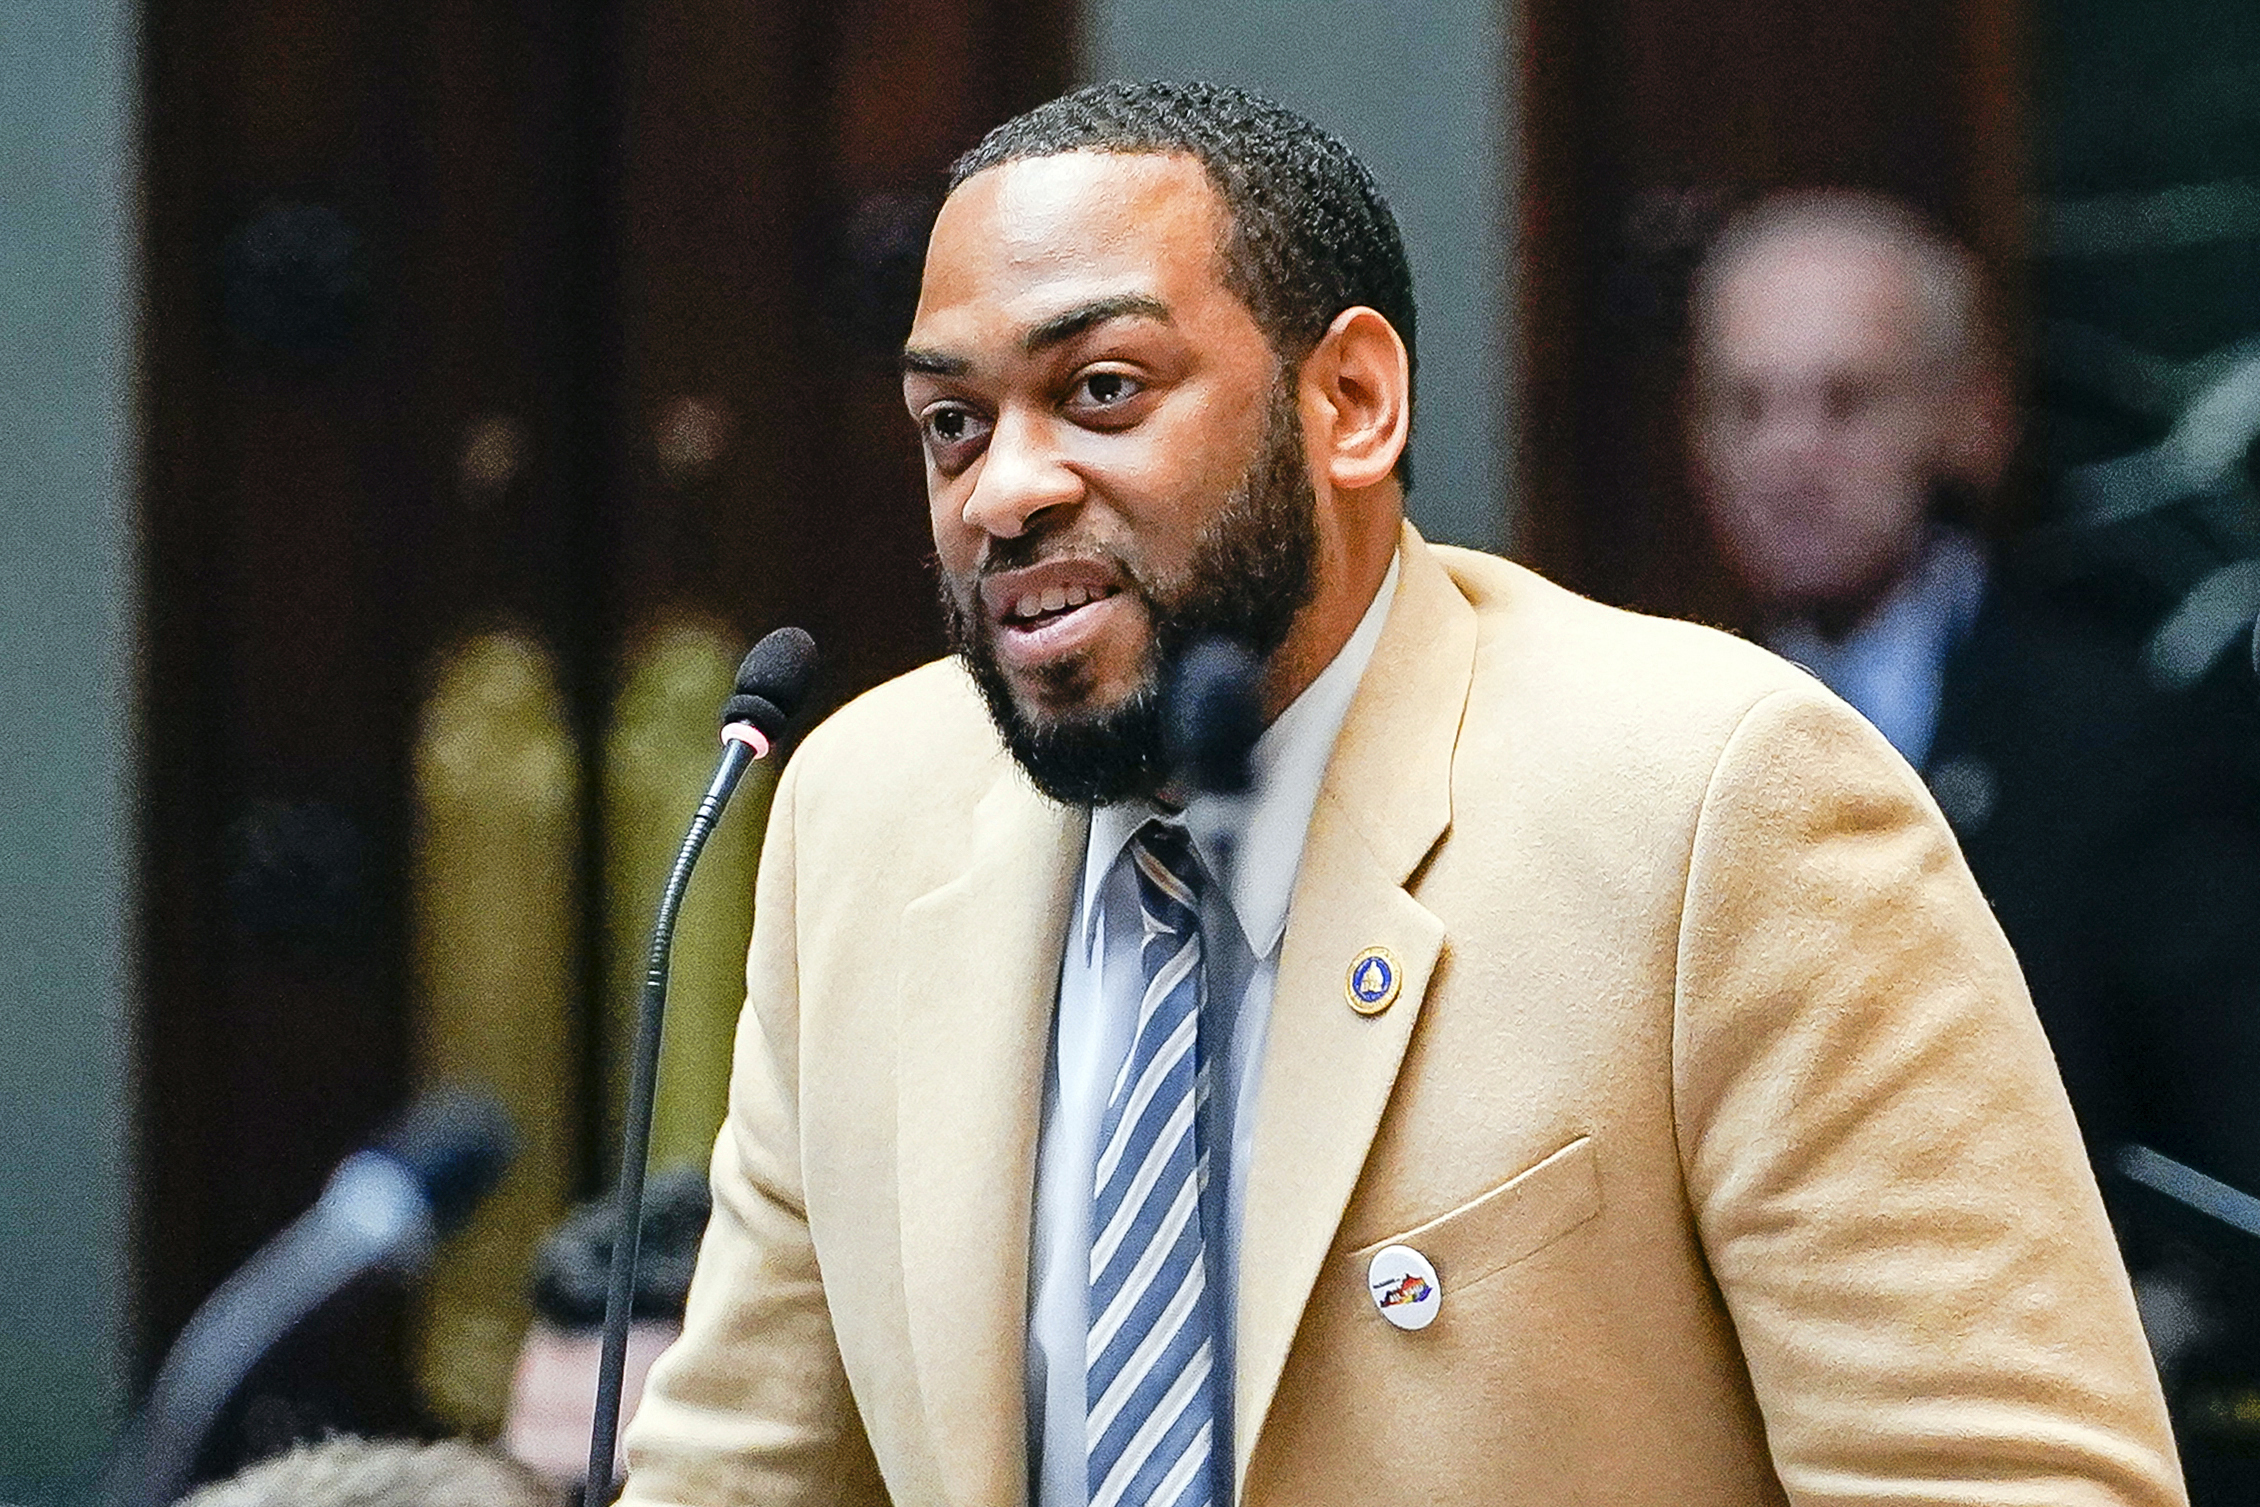 PHOTO: Rep. Charles Booker advocates for the passage of Kentucky HB-12 on the floor of the House of Representatives in the State Capitol in Frankfort, Ky., Feb. 19, 2020.